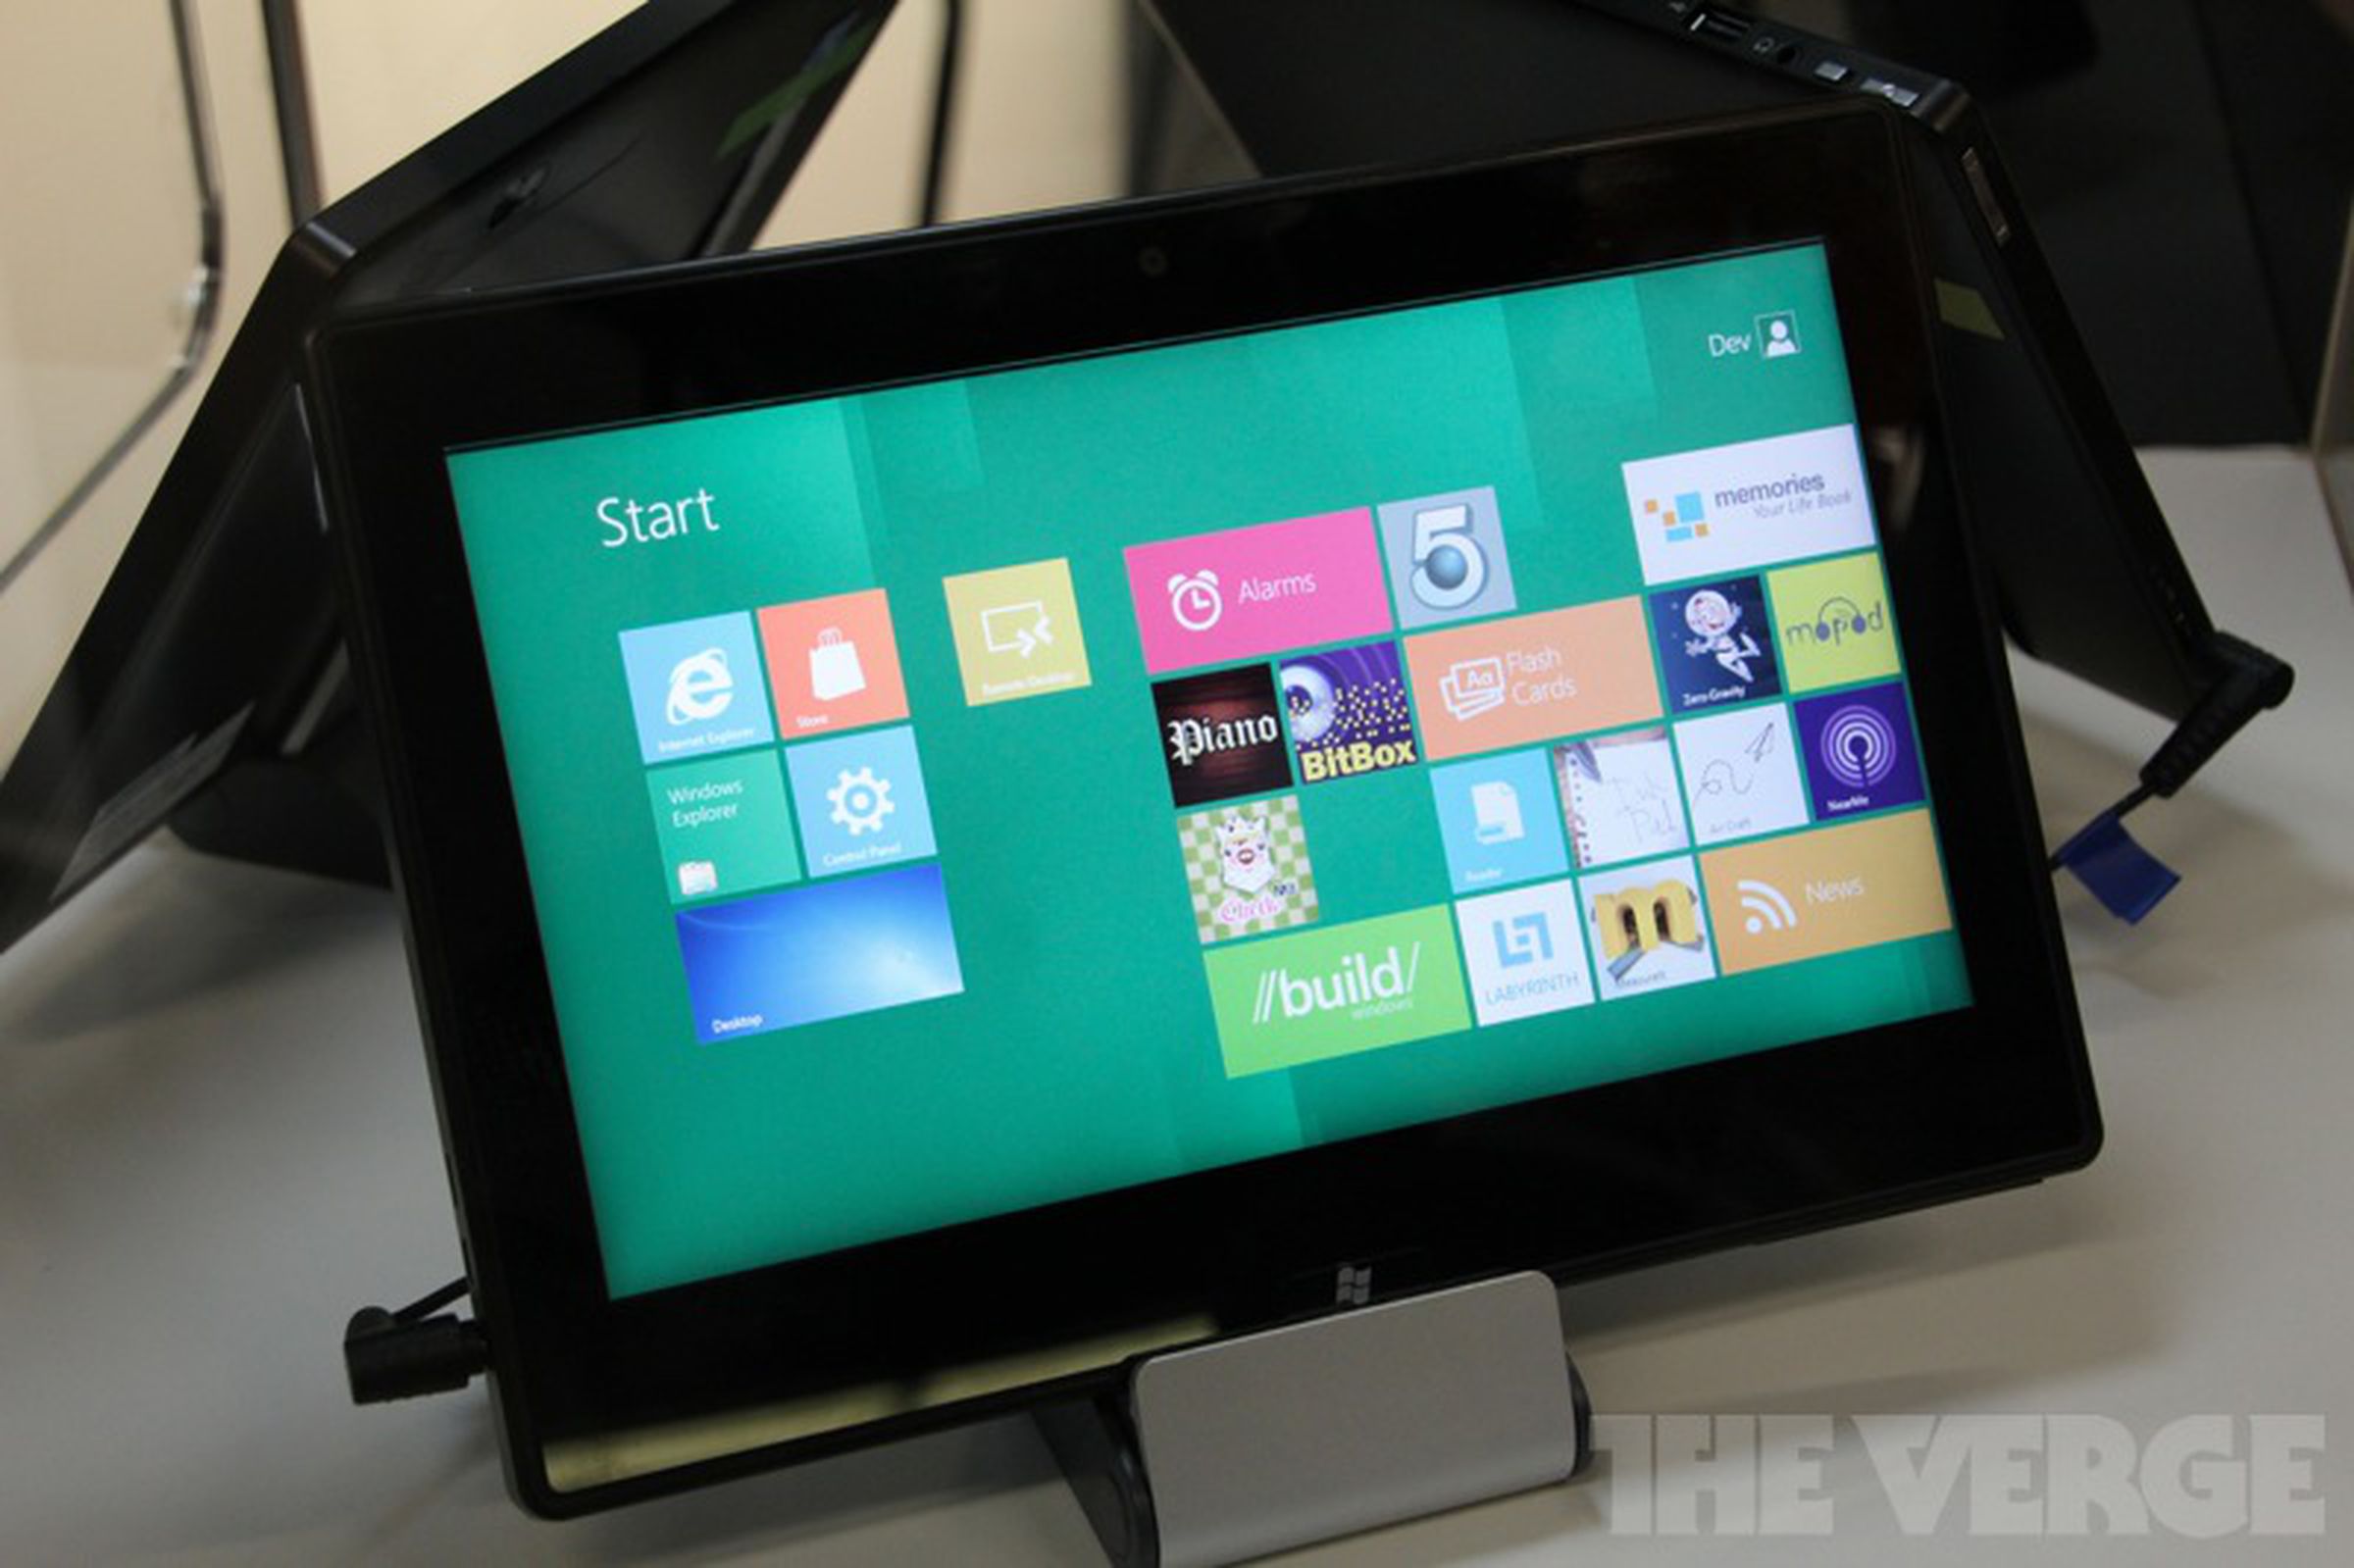 Texas Instruments reference design tablet hands-on photos